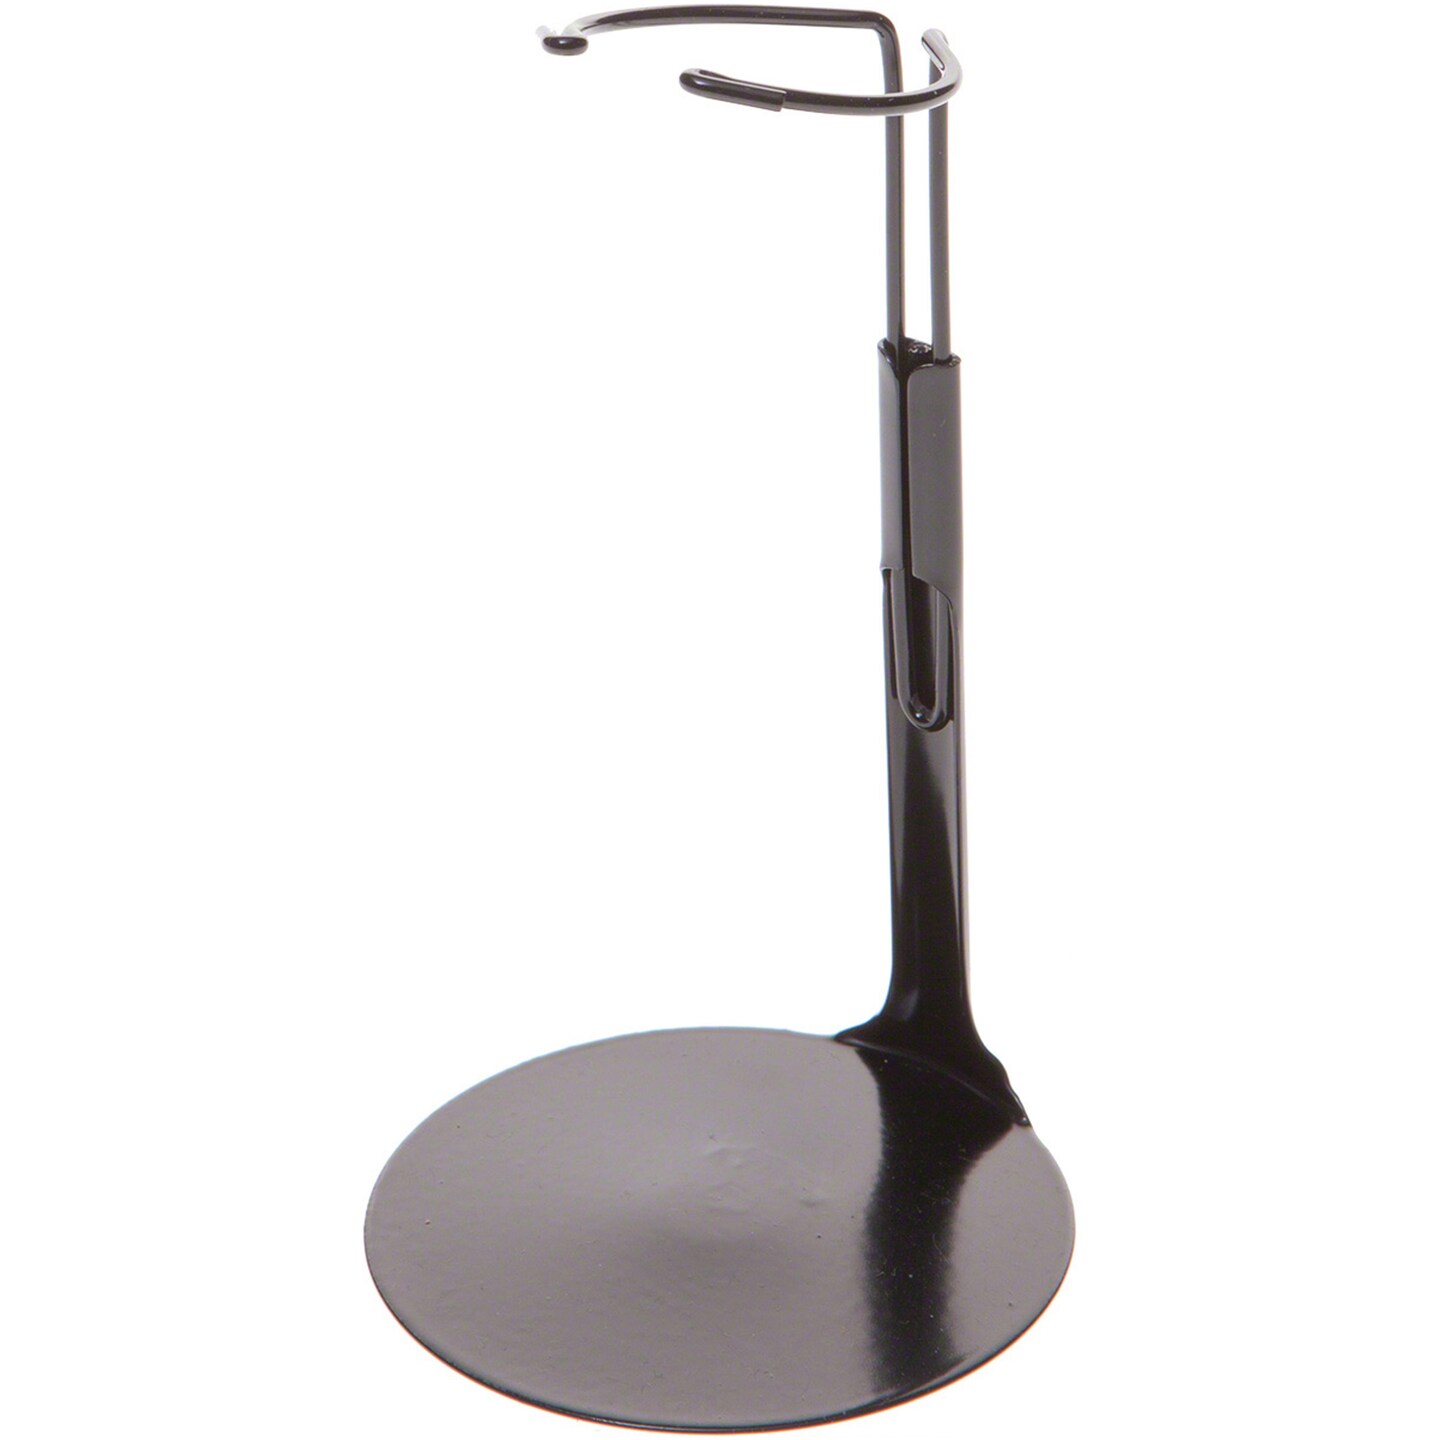 Kaiser 2075 Black Adjustable Doll Stand, fits 6.5 to 11 inch Dolls or Action Figures, waist width adjusts from 1.375 to 1.75 inches